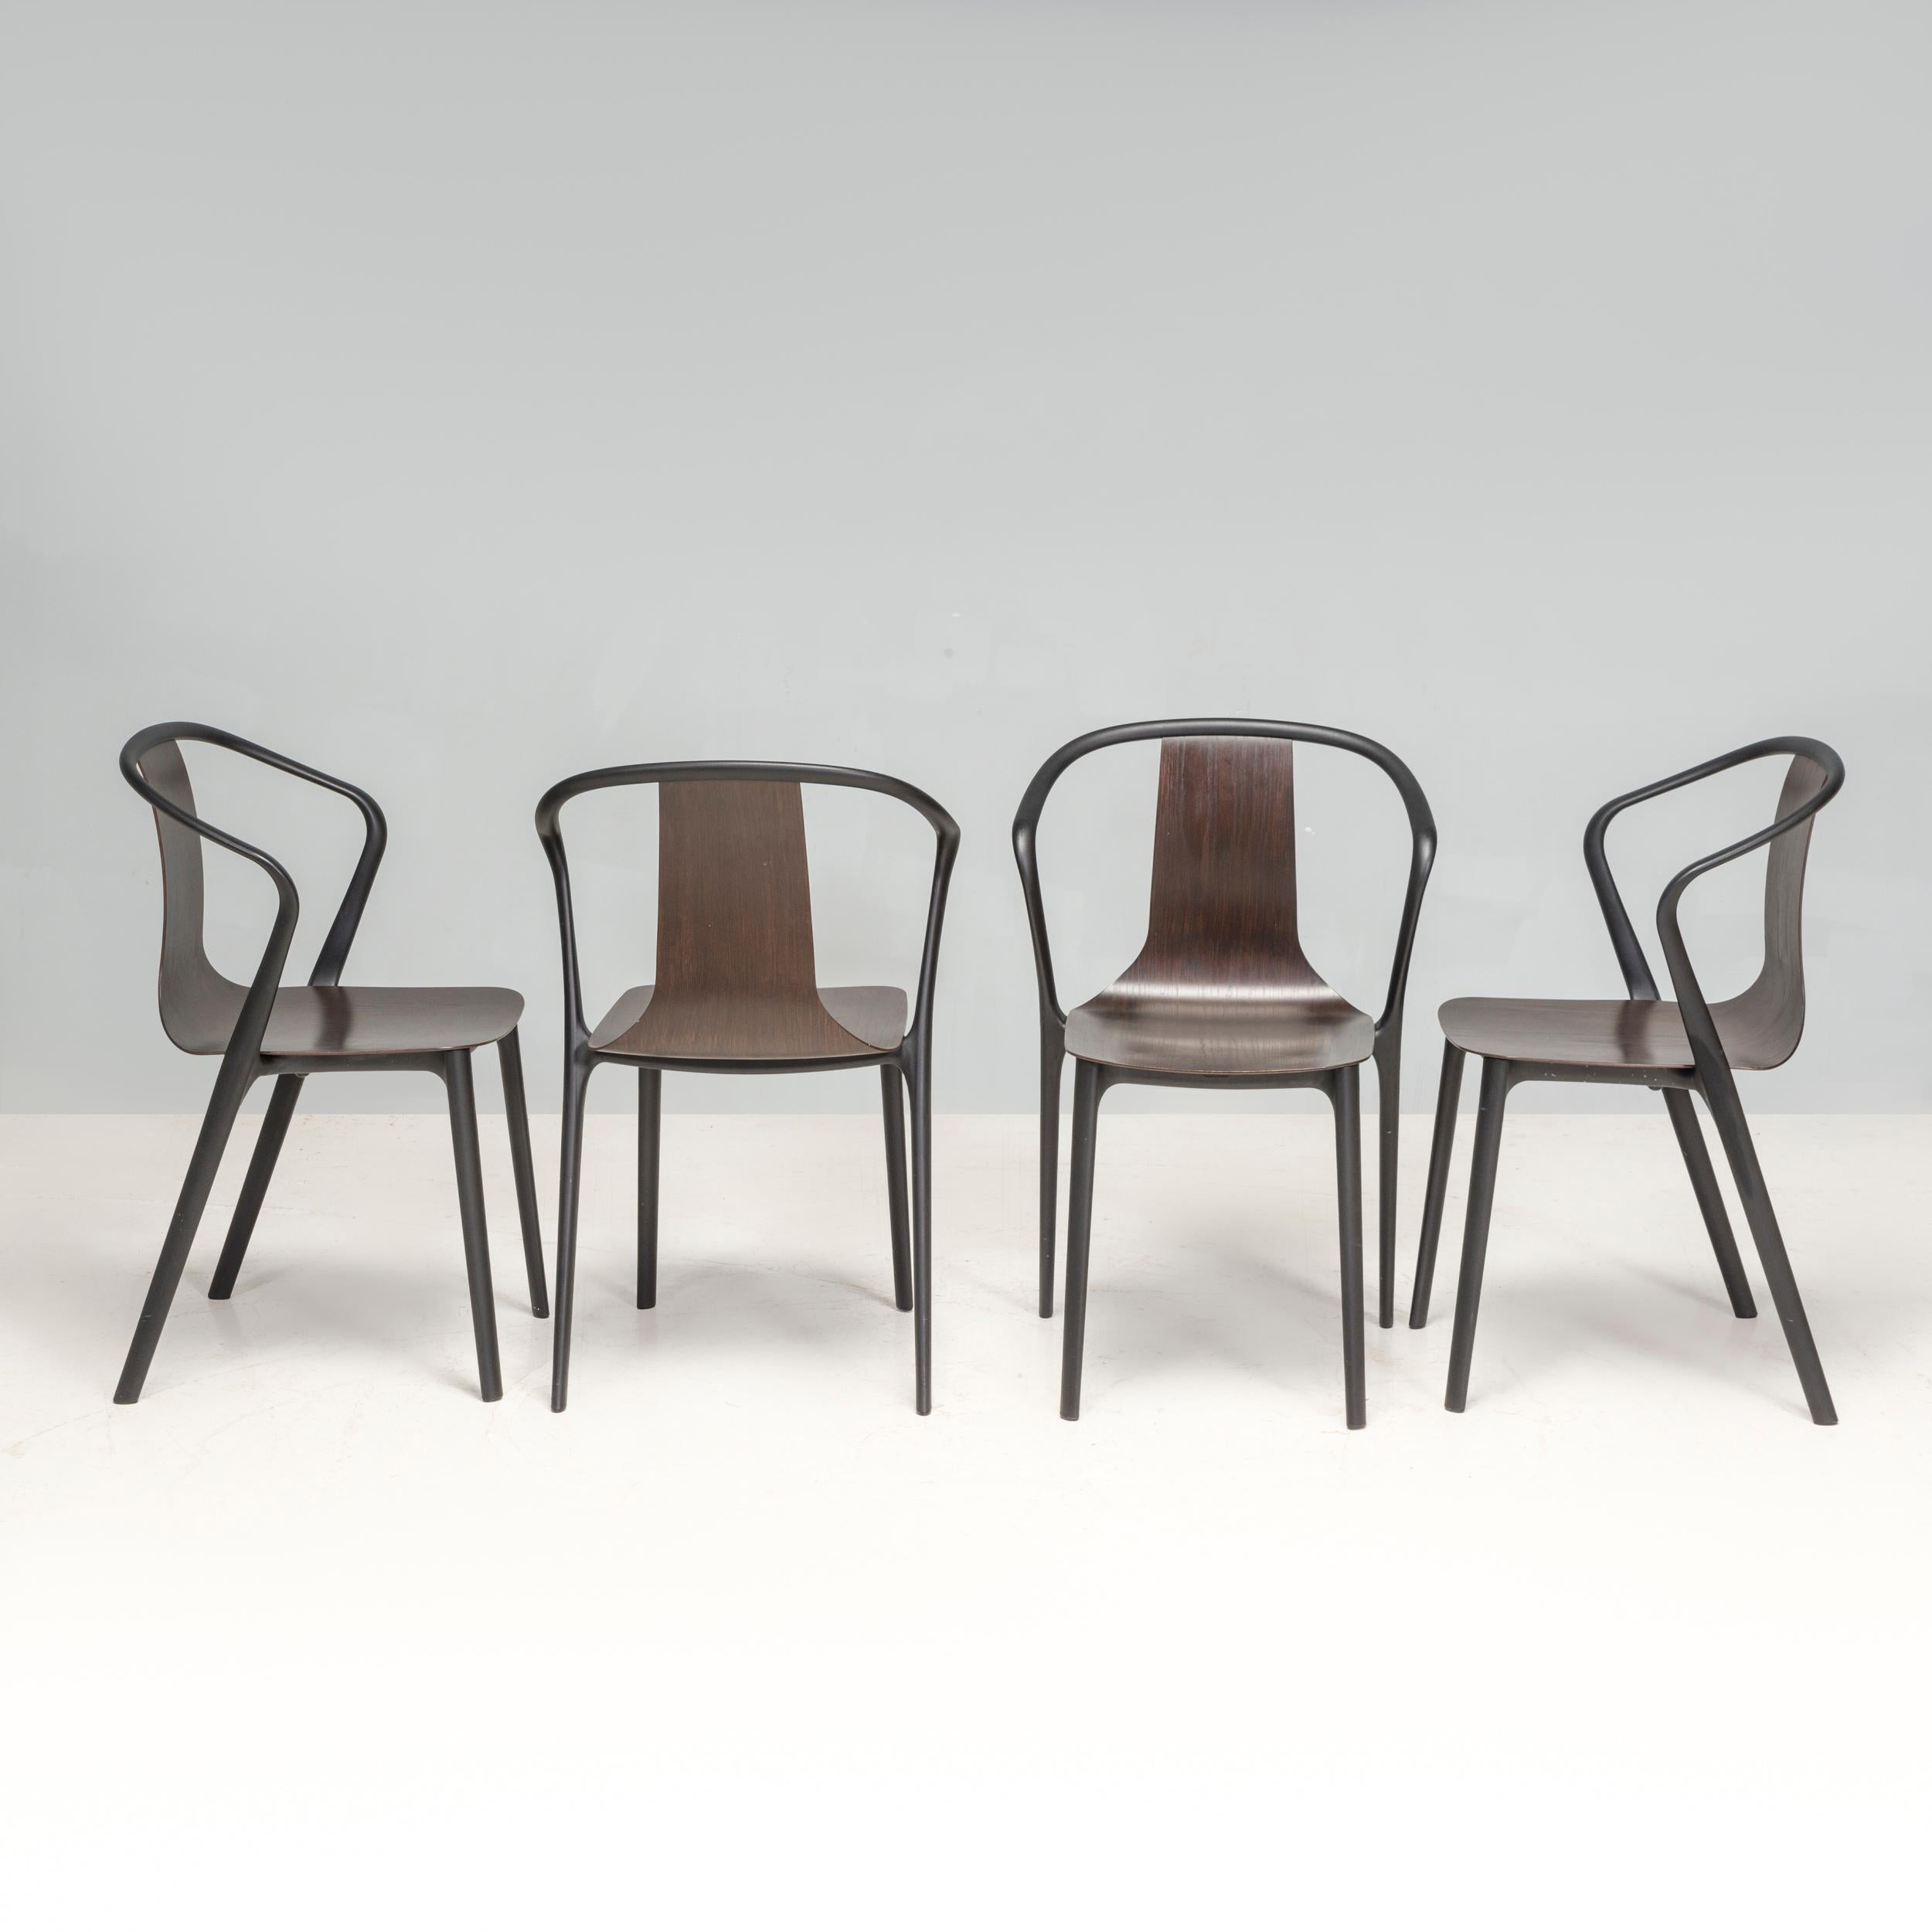 Contemporary Ronan & Erwan Bouroullec for Vitra Dark Oak Belleville Dining Chairs, Set of 4 For Sale